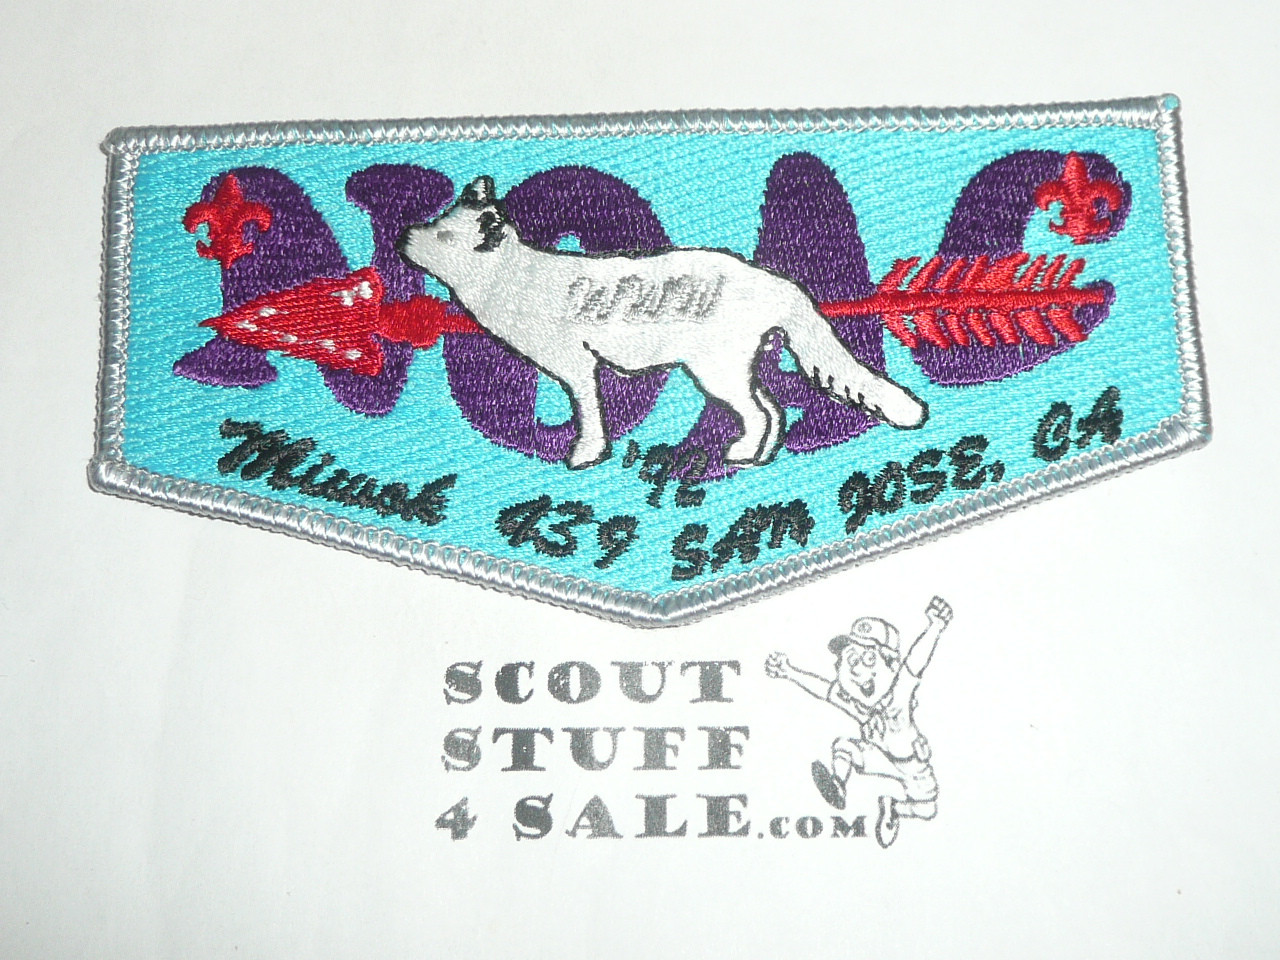 Order of the Arrow Lodge #439 Miwok s38 1992 NOAC Flap Patch